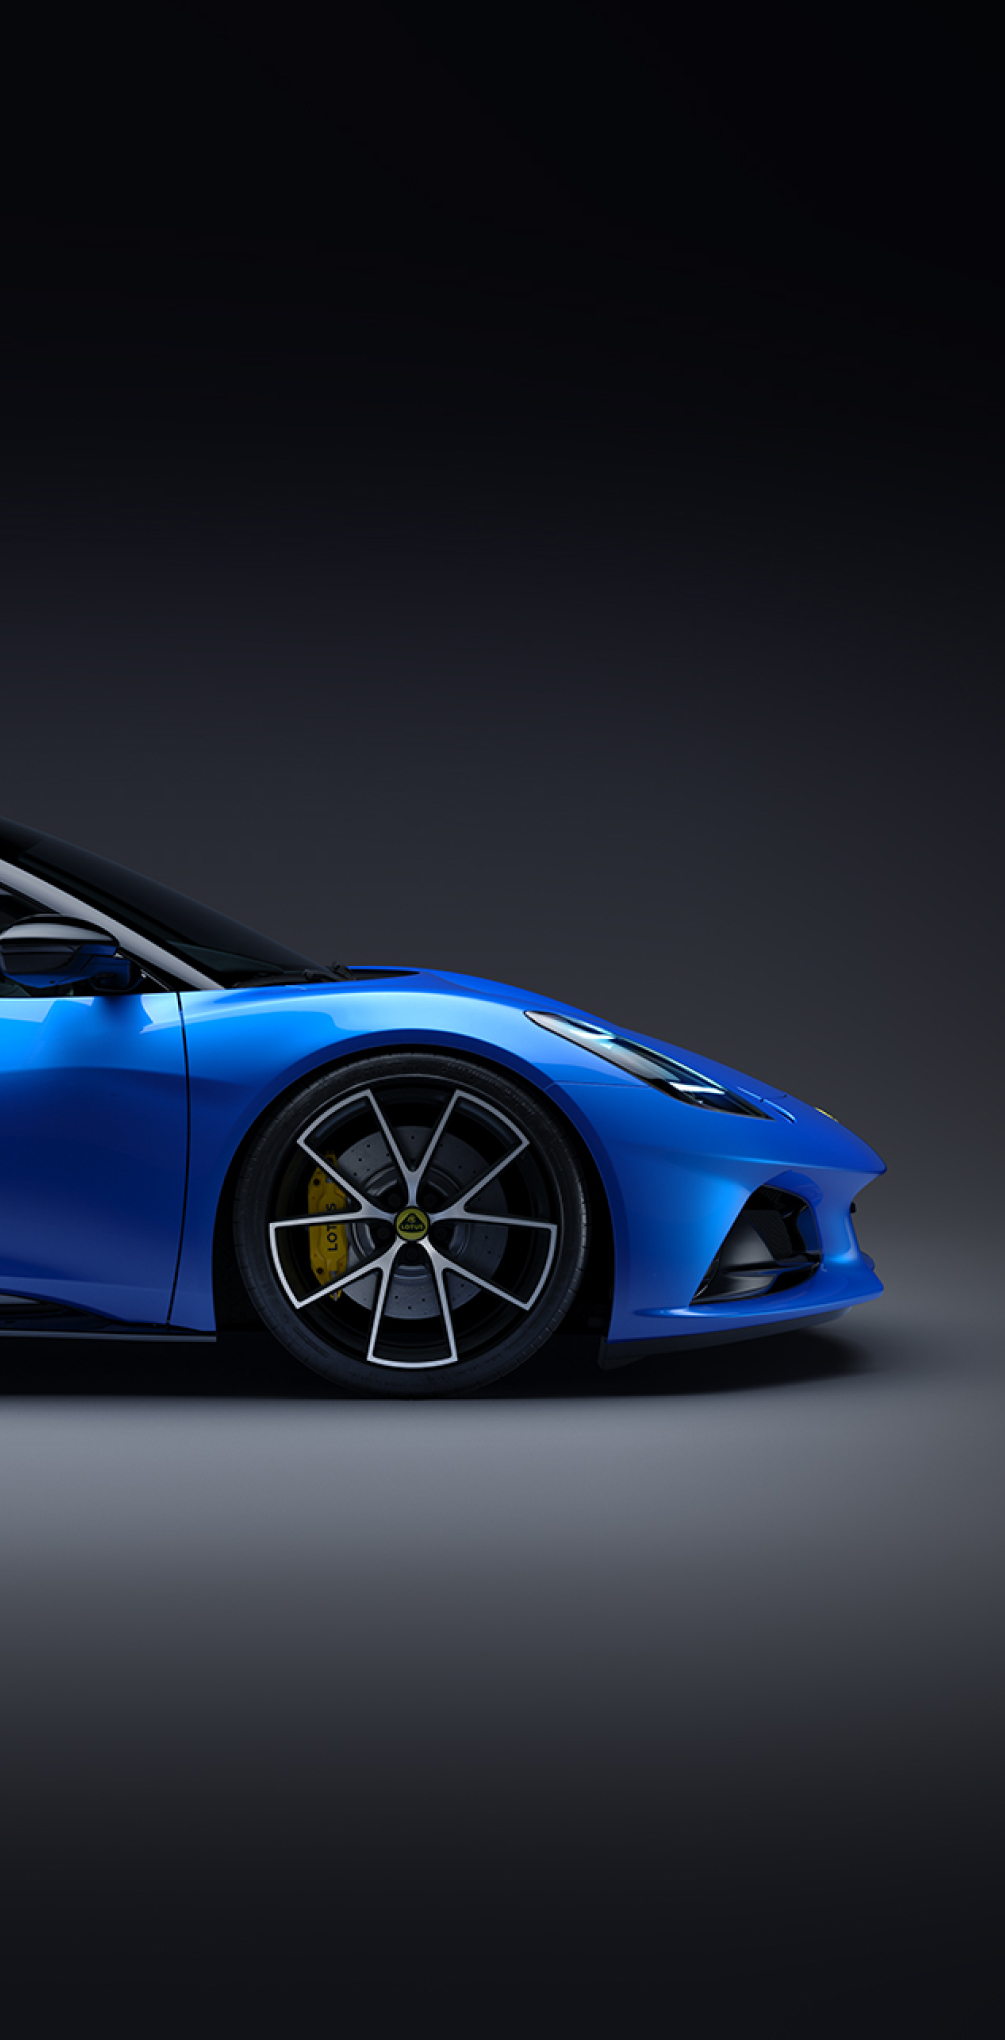 Front proflie of the forward half of a blue Lotus Emira in an abstract grey environment. The yellow brake calipers and yellow Lotus wheel badge are visible. | 0702M-图集1.jpg